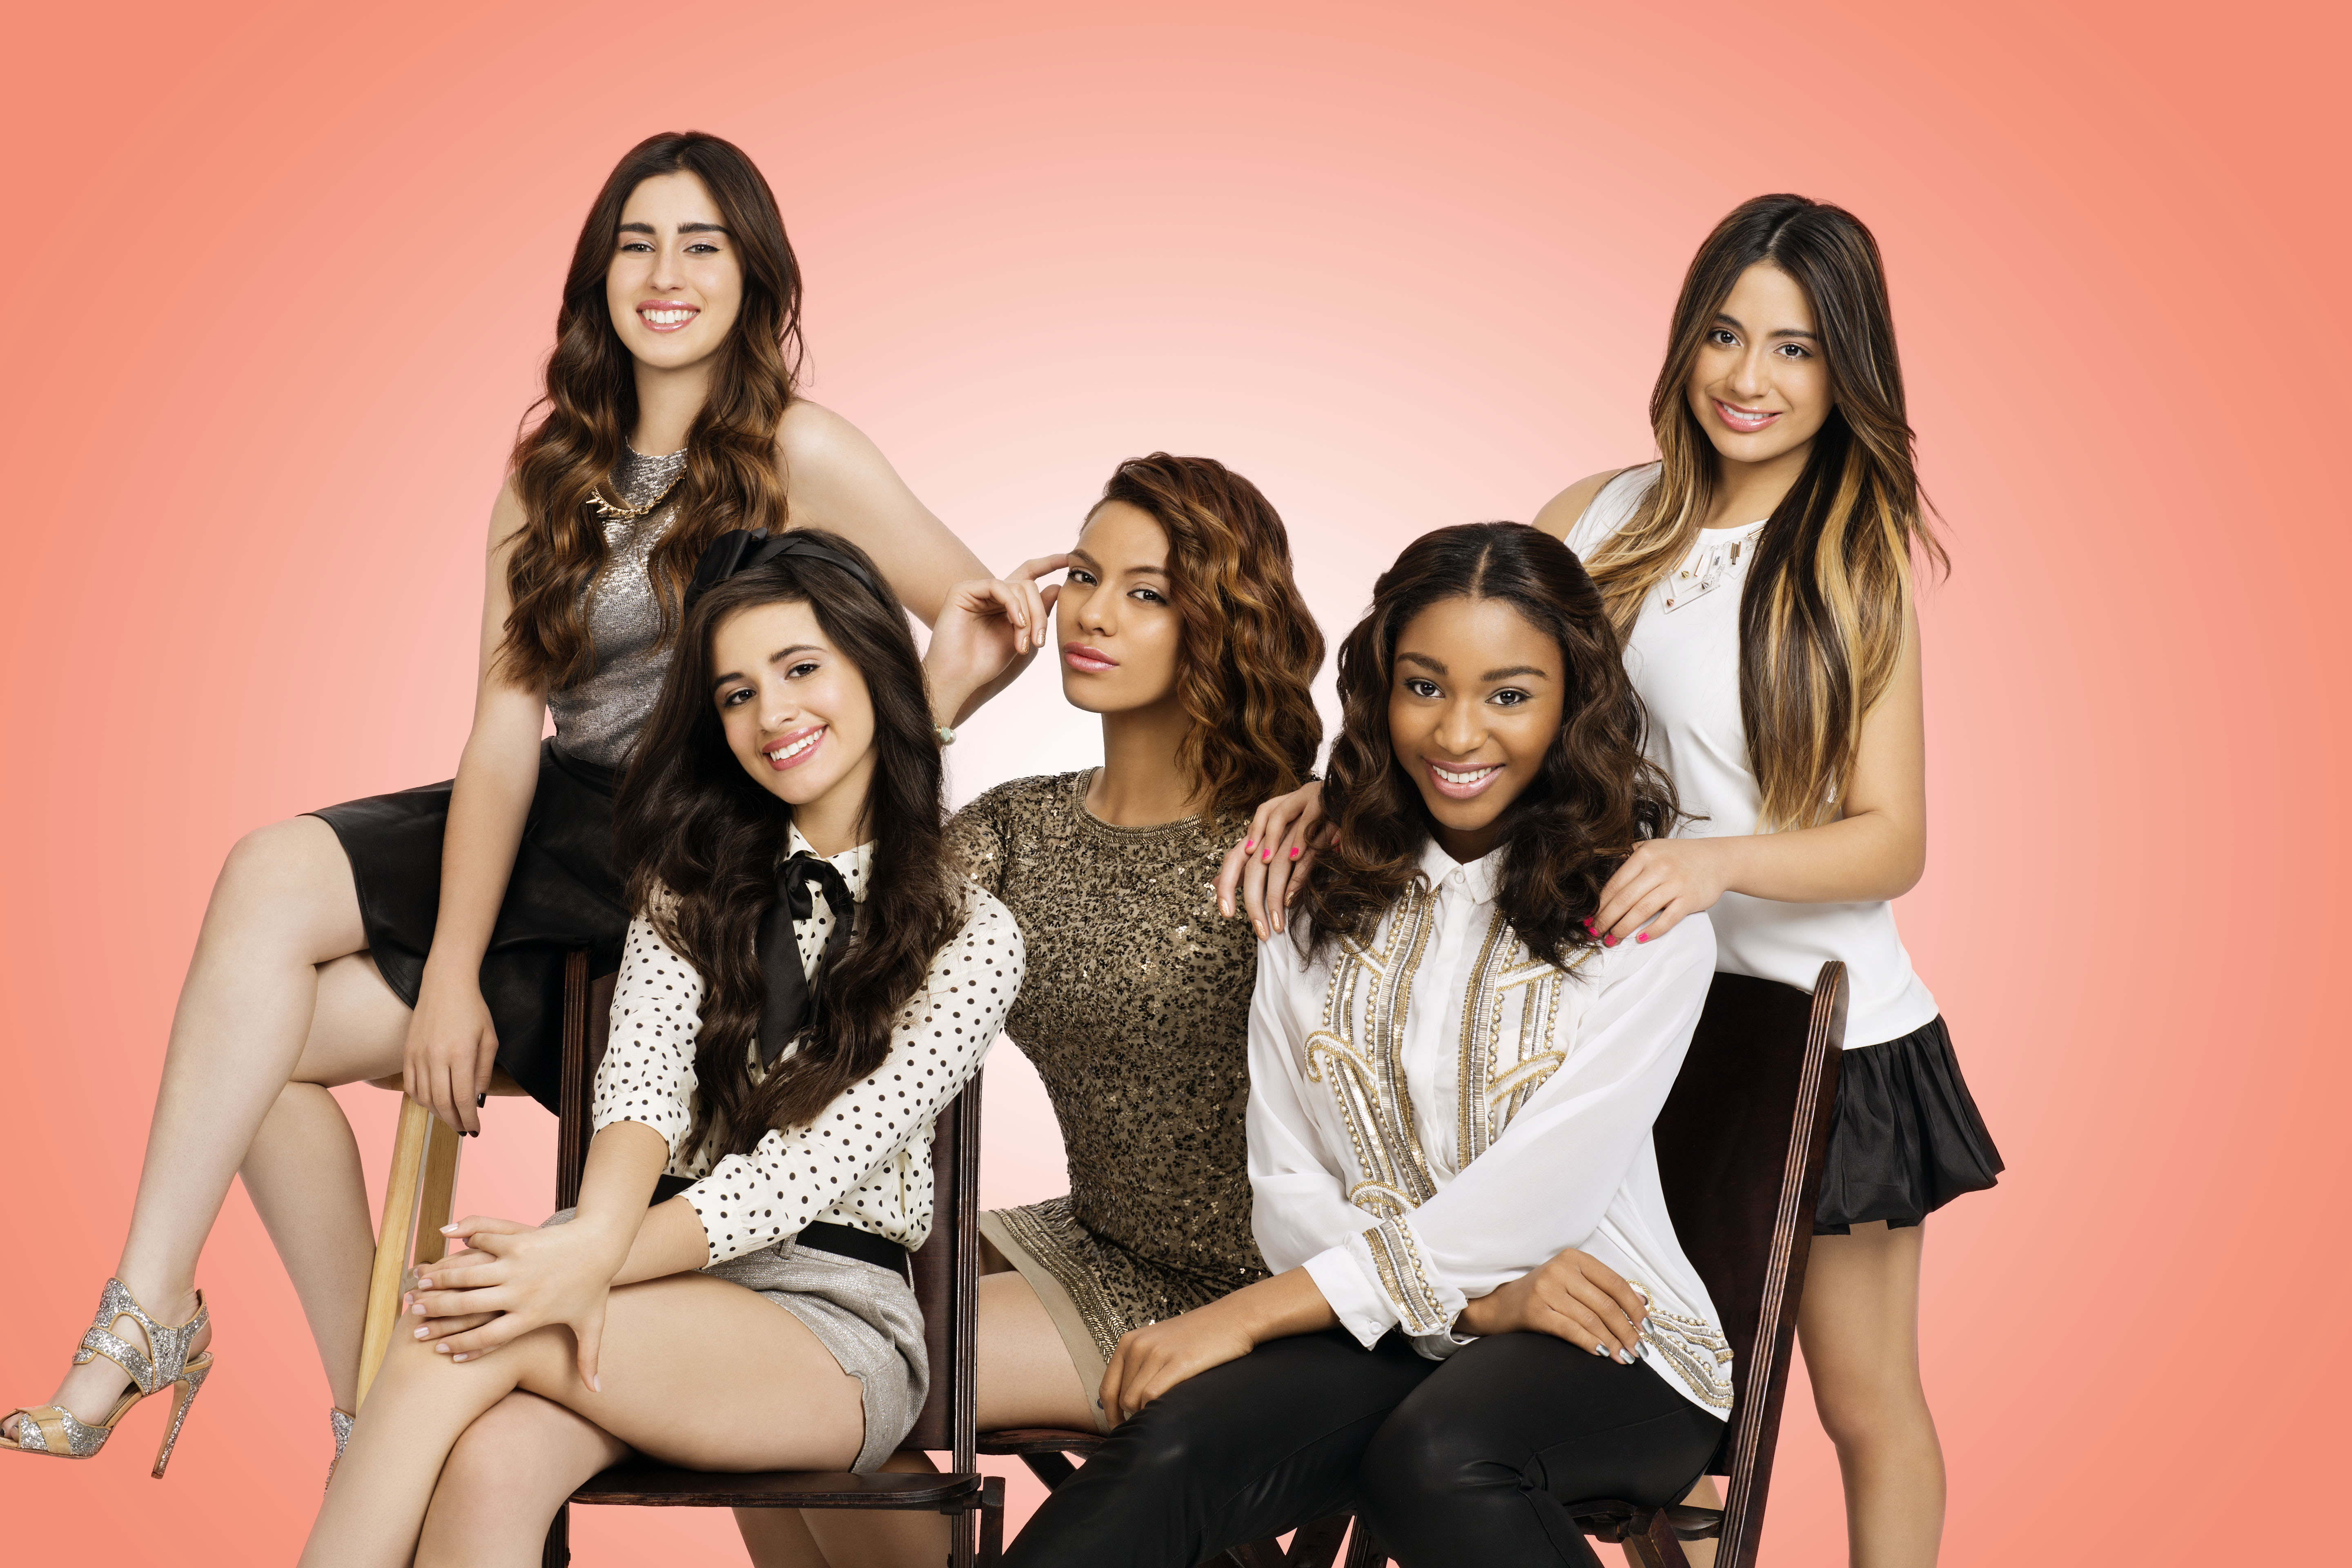 Work From Home ( Ft. Ty Dolla $ign) Lyrics - Fifth Harmony